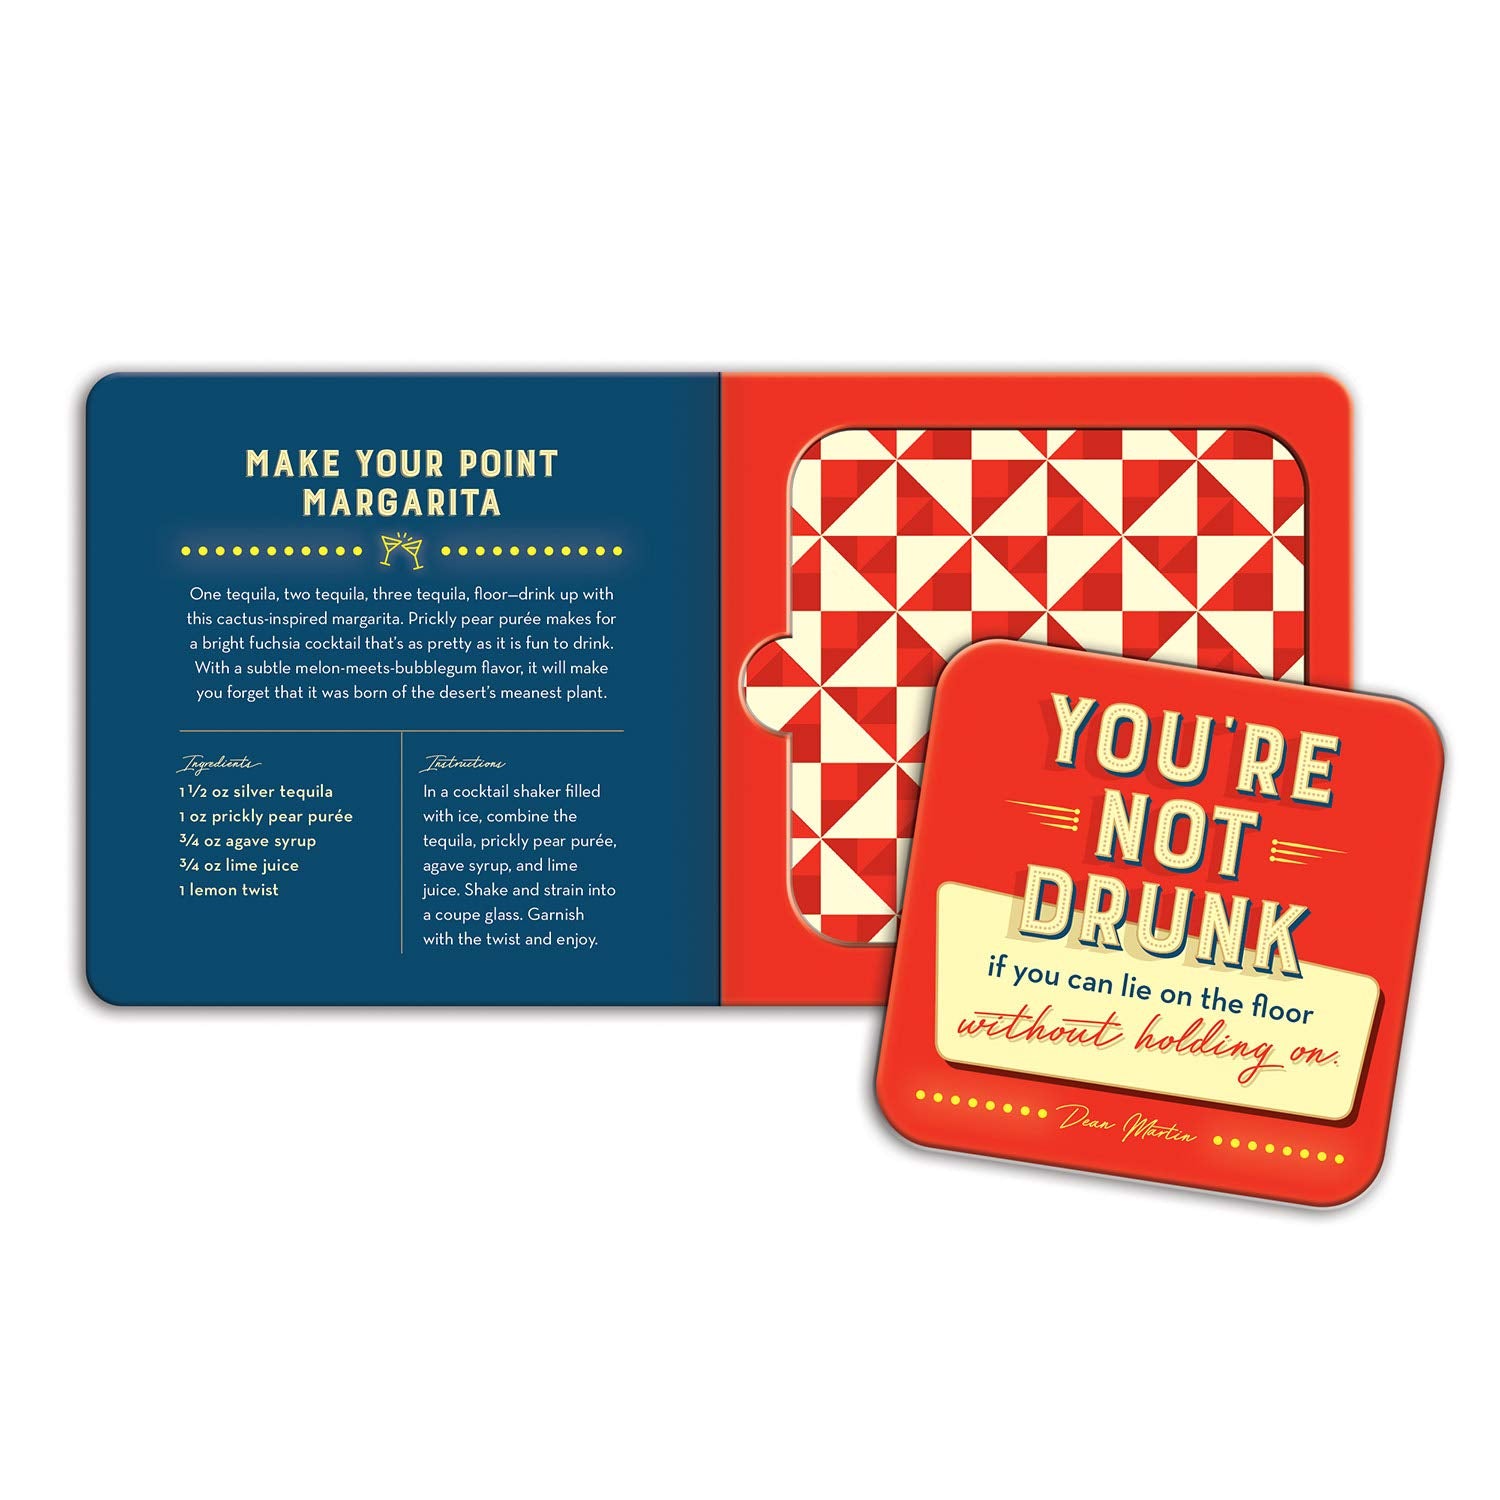 inside view of red and blue pages with a coaster on one side with text "you're not drunk"